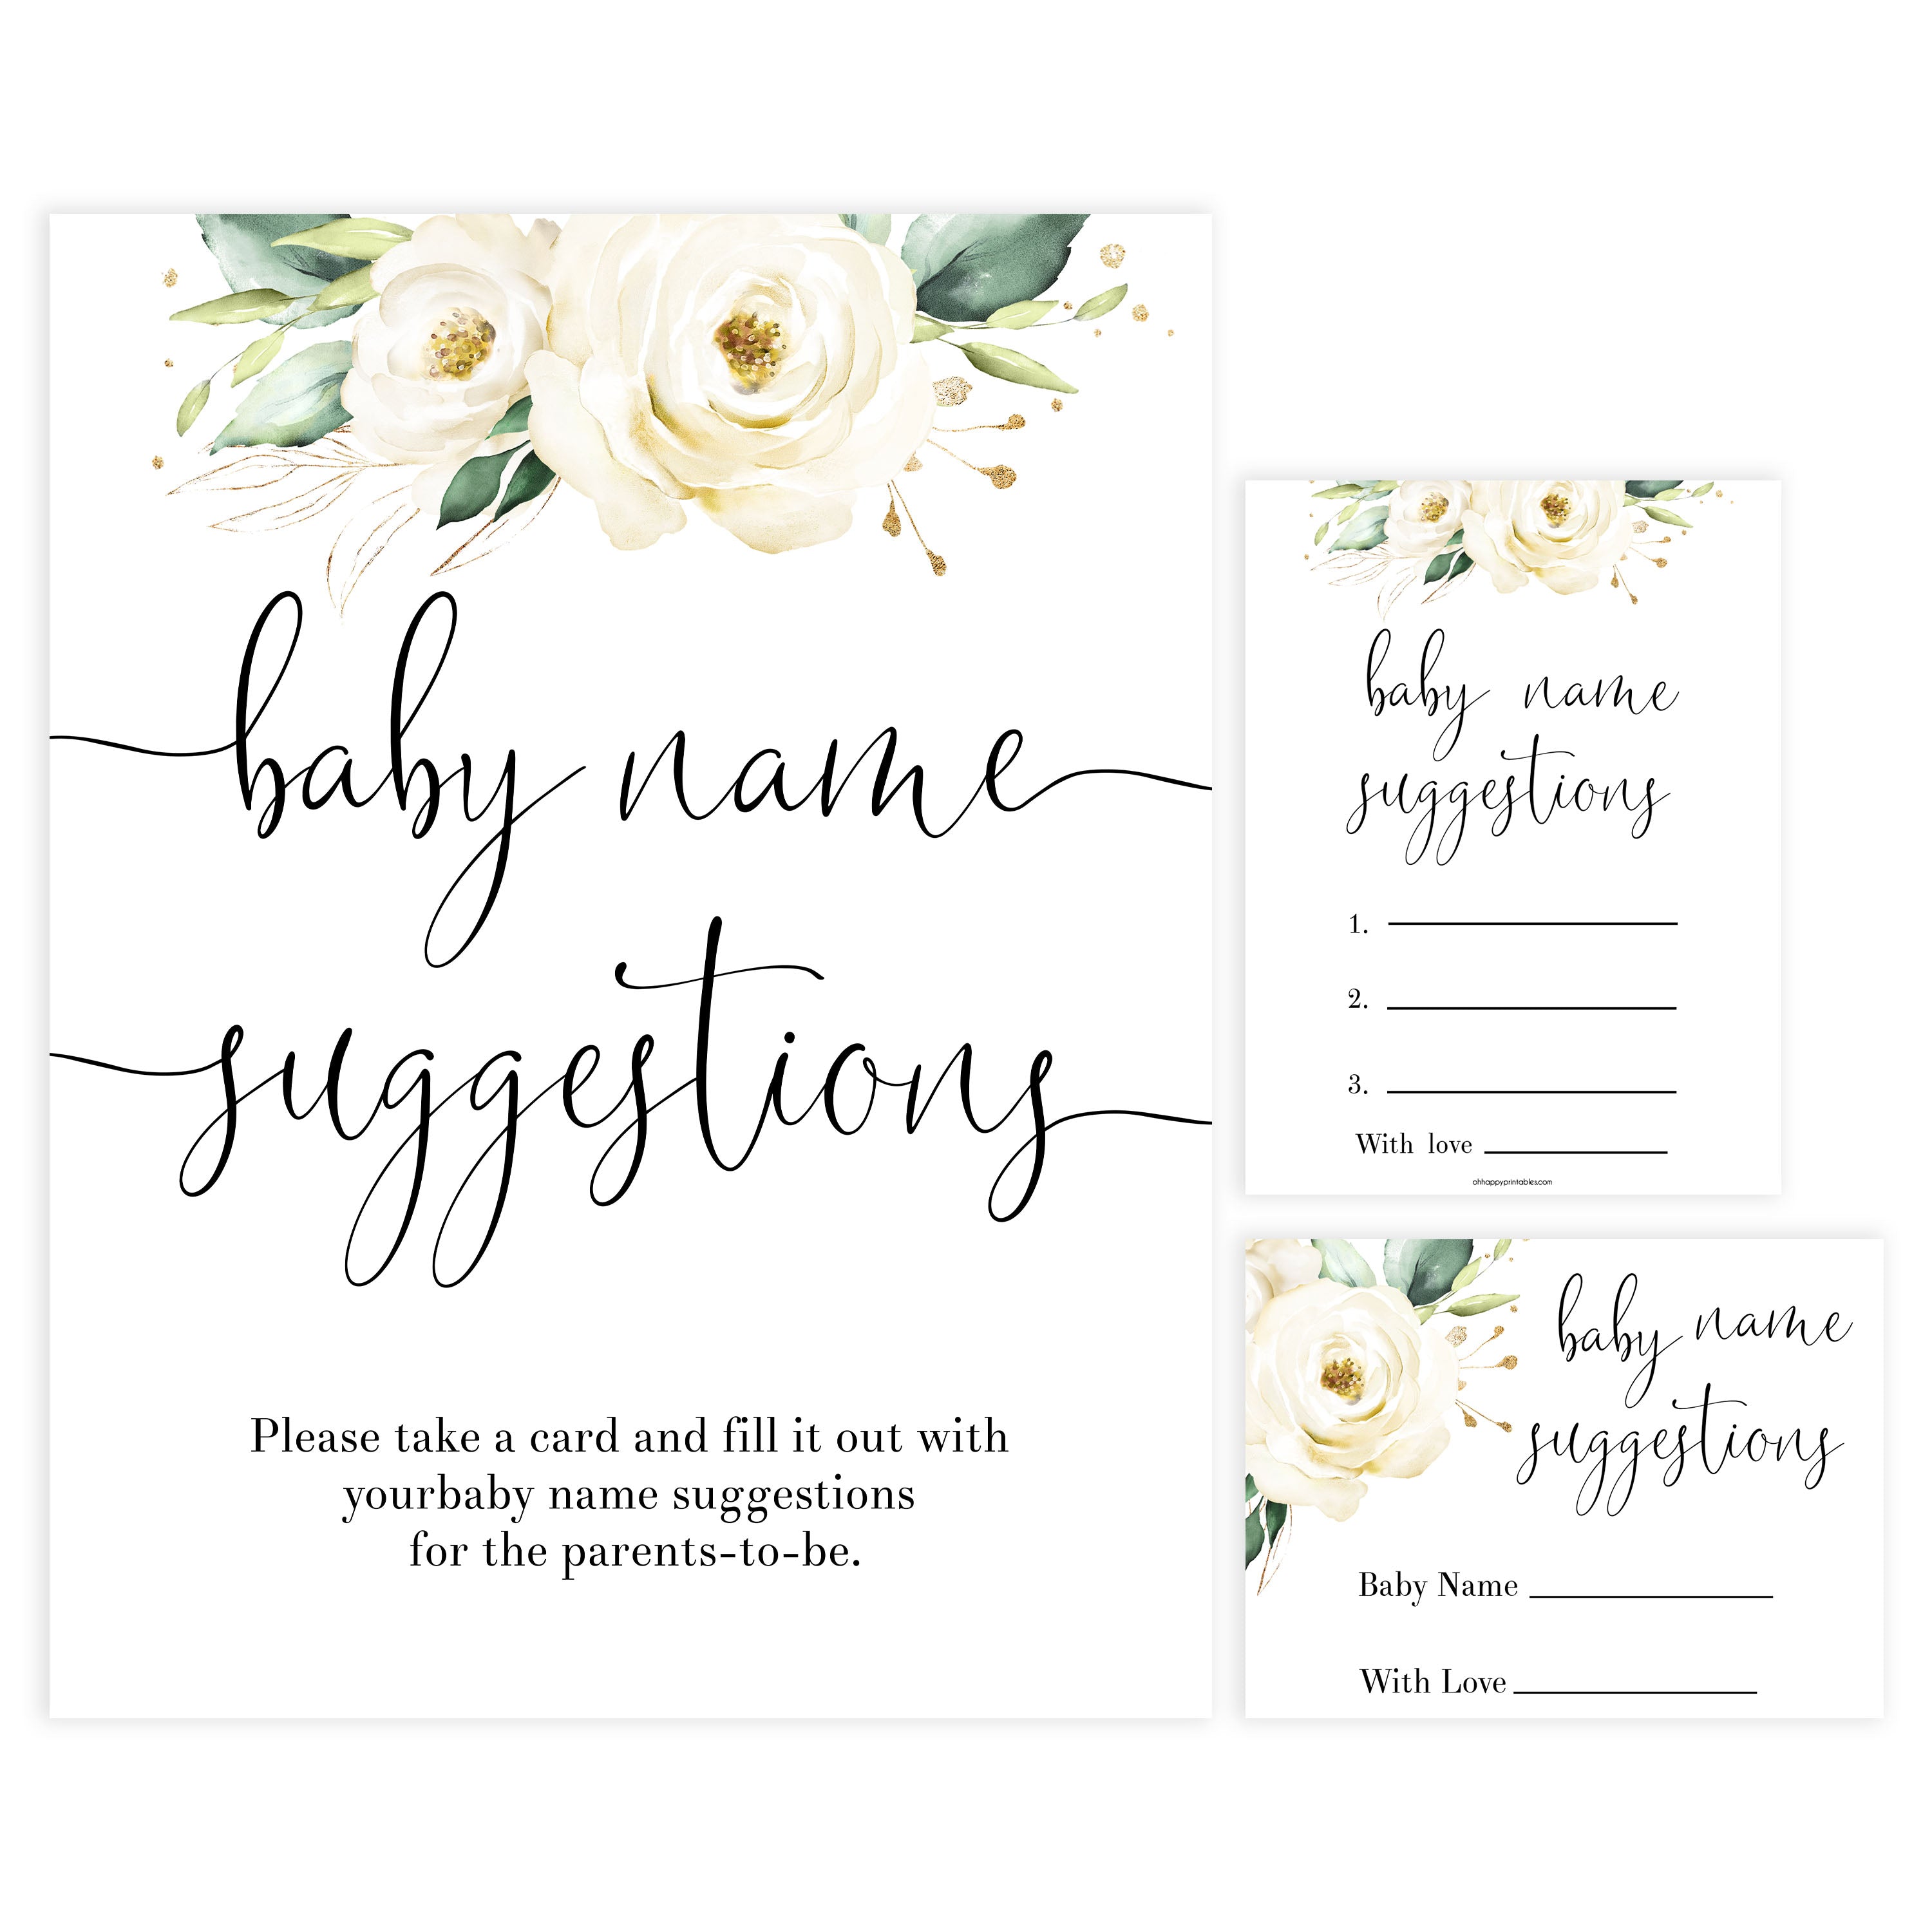 baby name suggestions game, Printable baby shower games, shite floral baby games, baby shower games, fun baby shower ideas, top baby shower ideas, floral baby shower, baby shower games, fun floral baby shower ideas